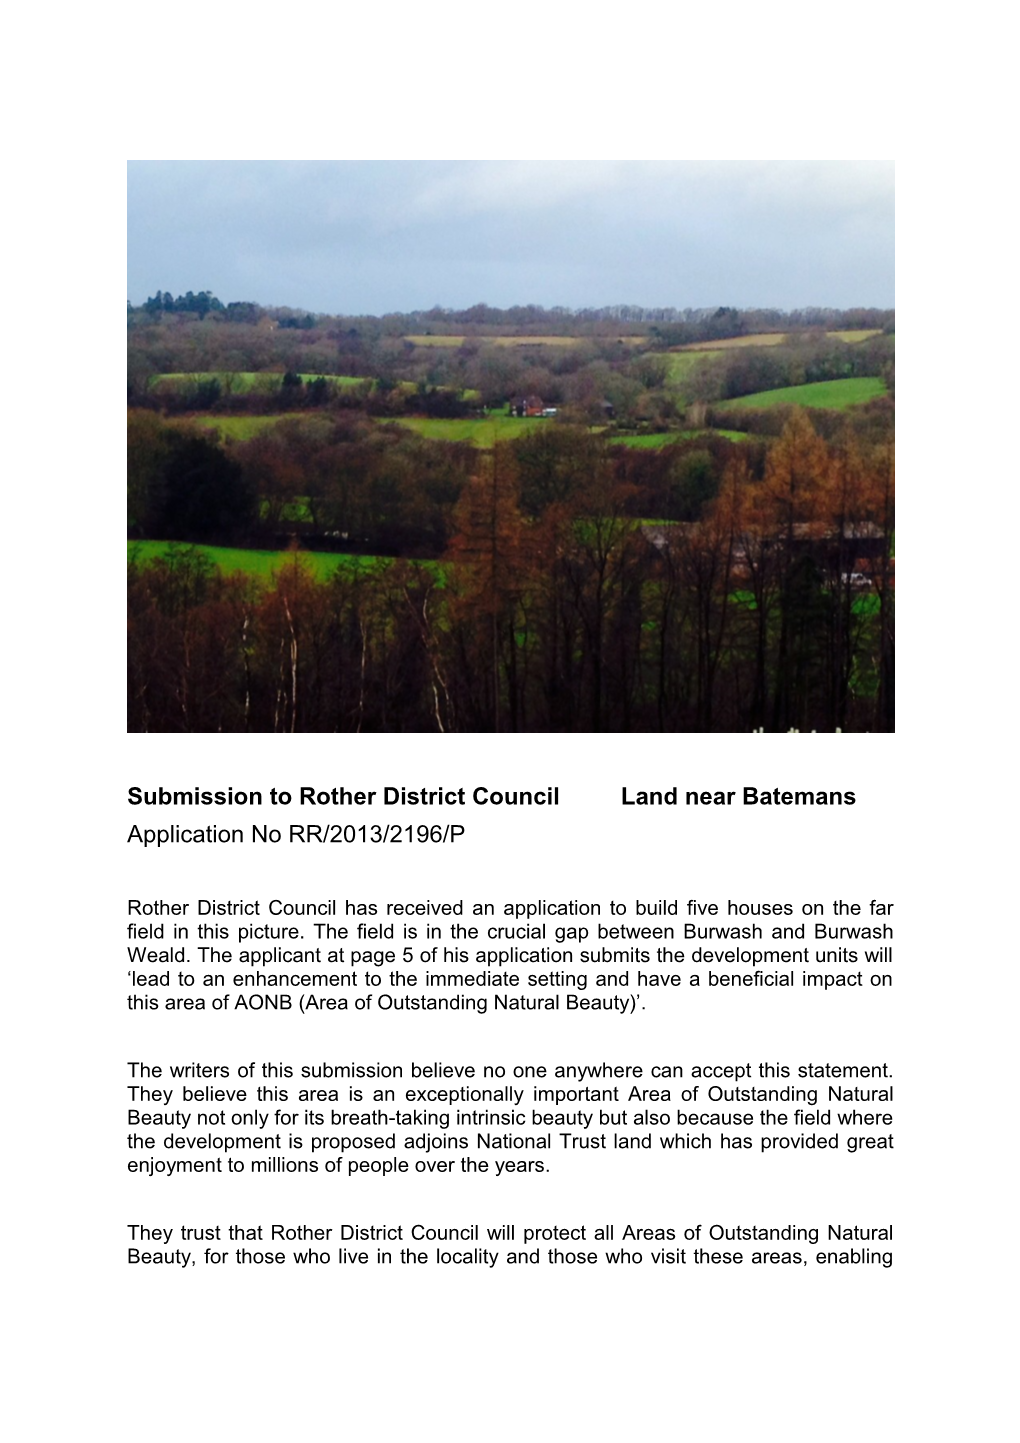 Submission to Rother District Council Land Near Batemans